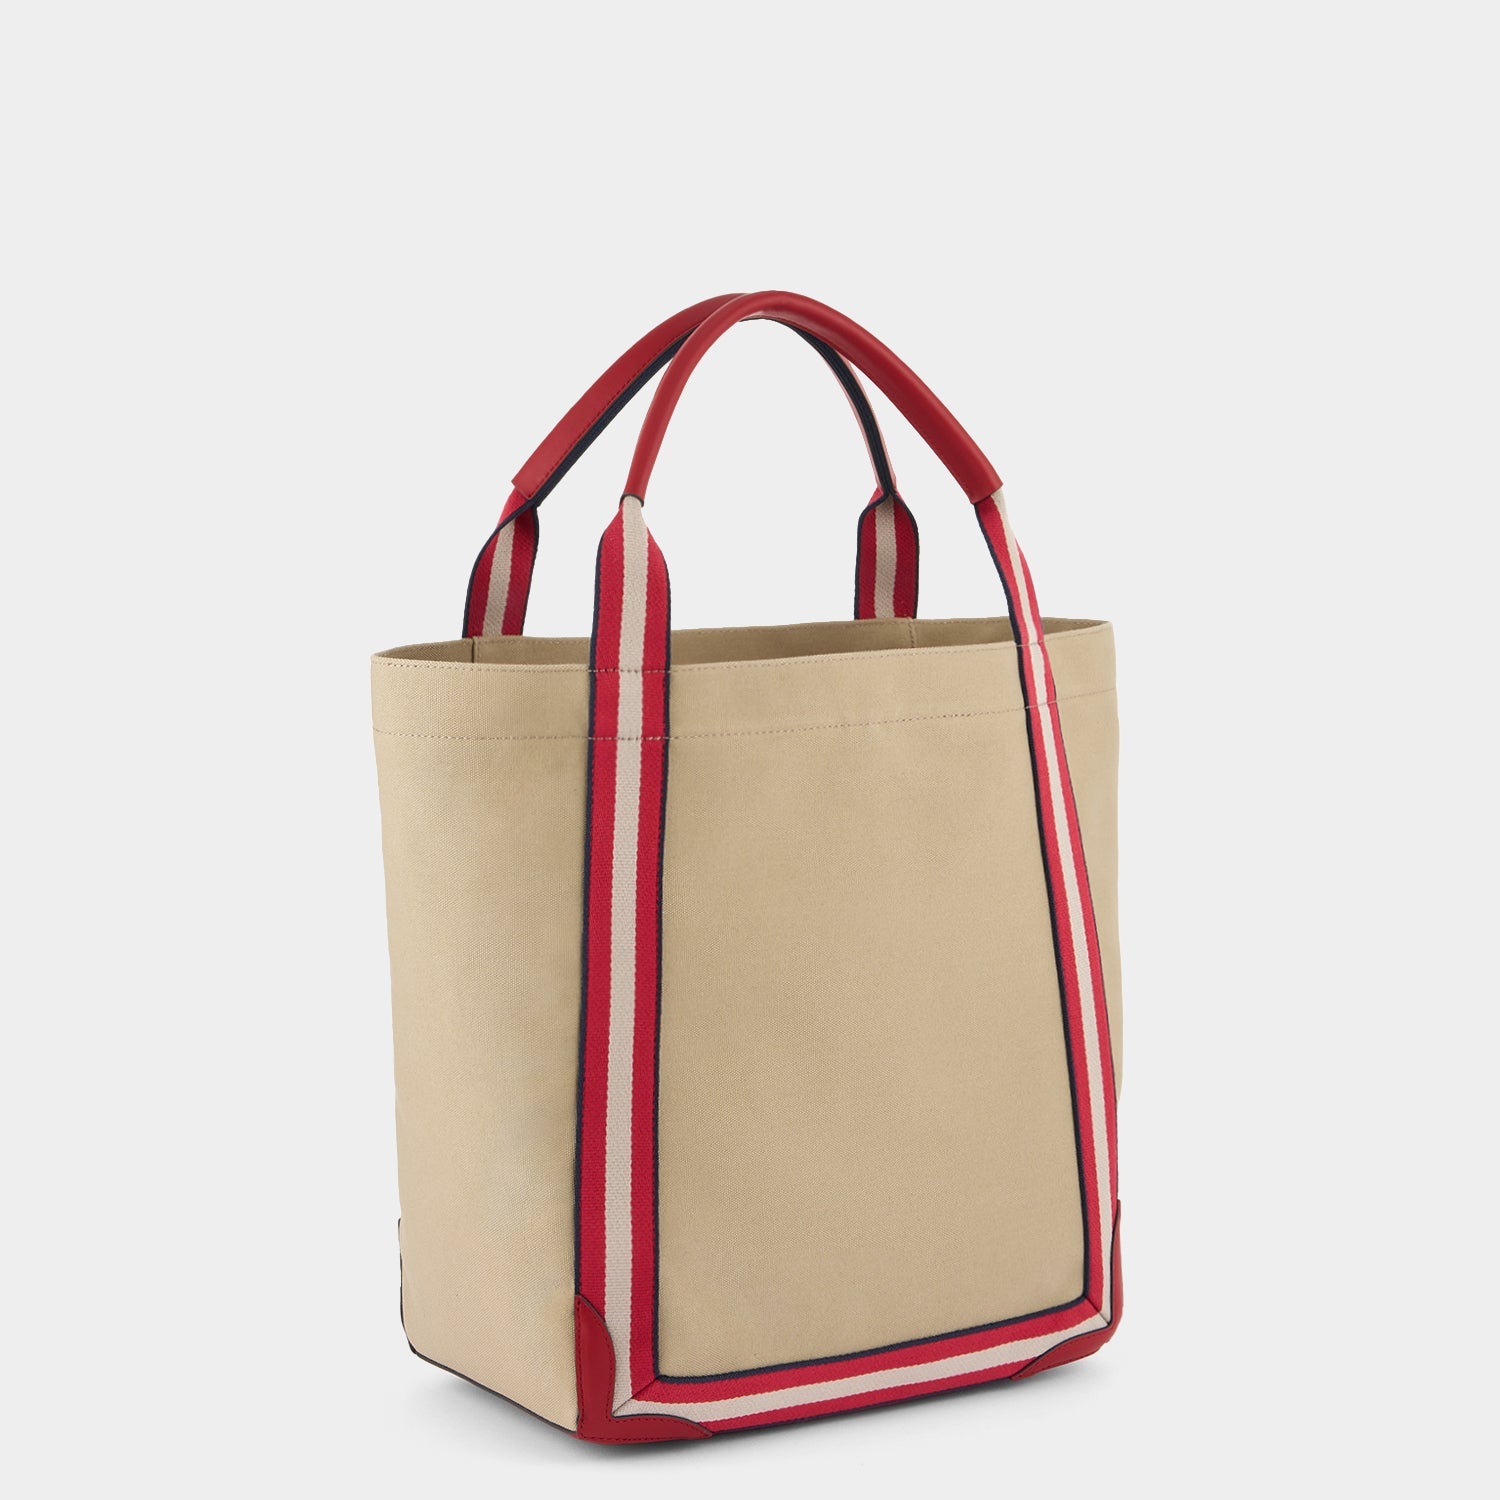 Bespoke Walton Pont Tote -

                  
                    Circus Leather in Red -
                  

                  Anya Hindmarch EU
